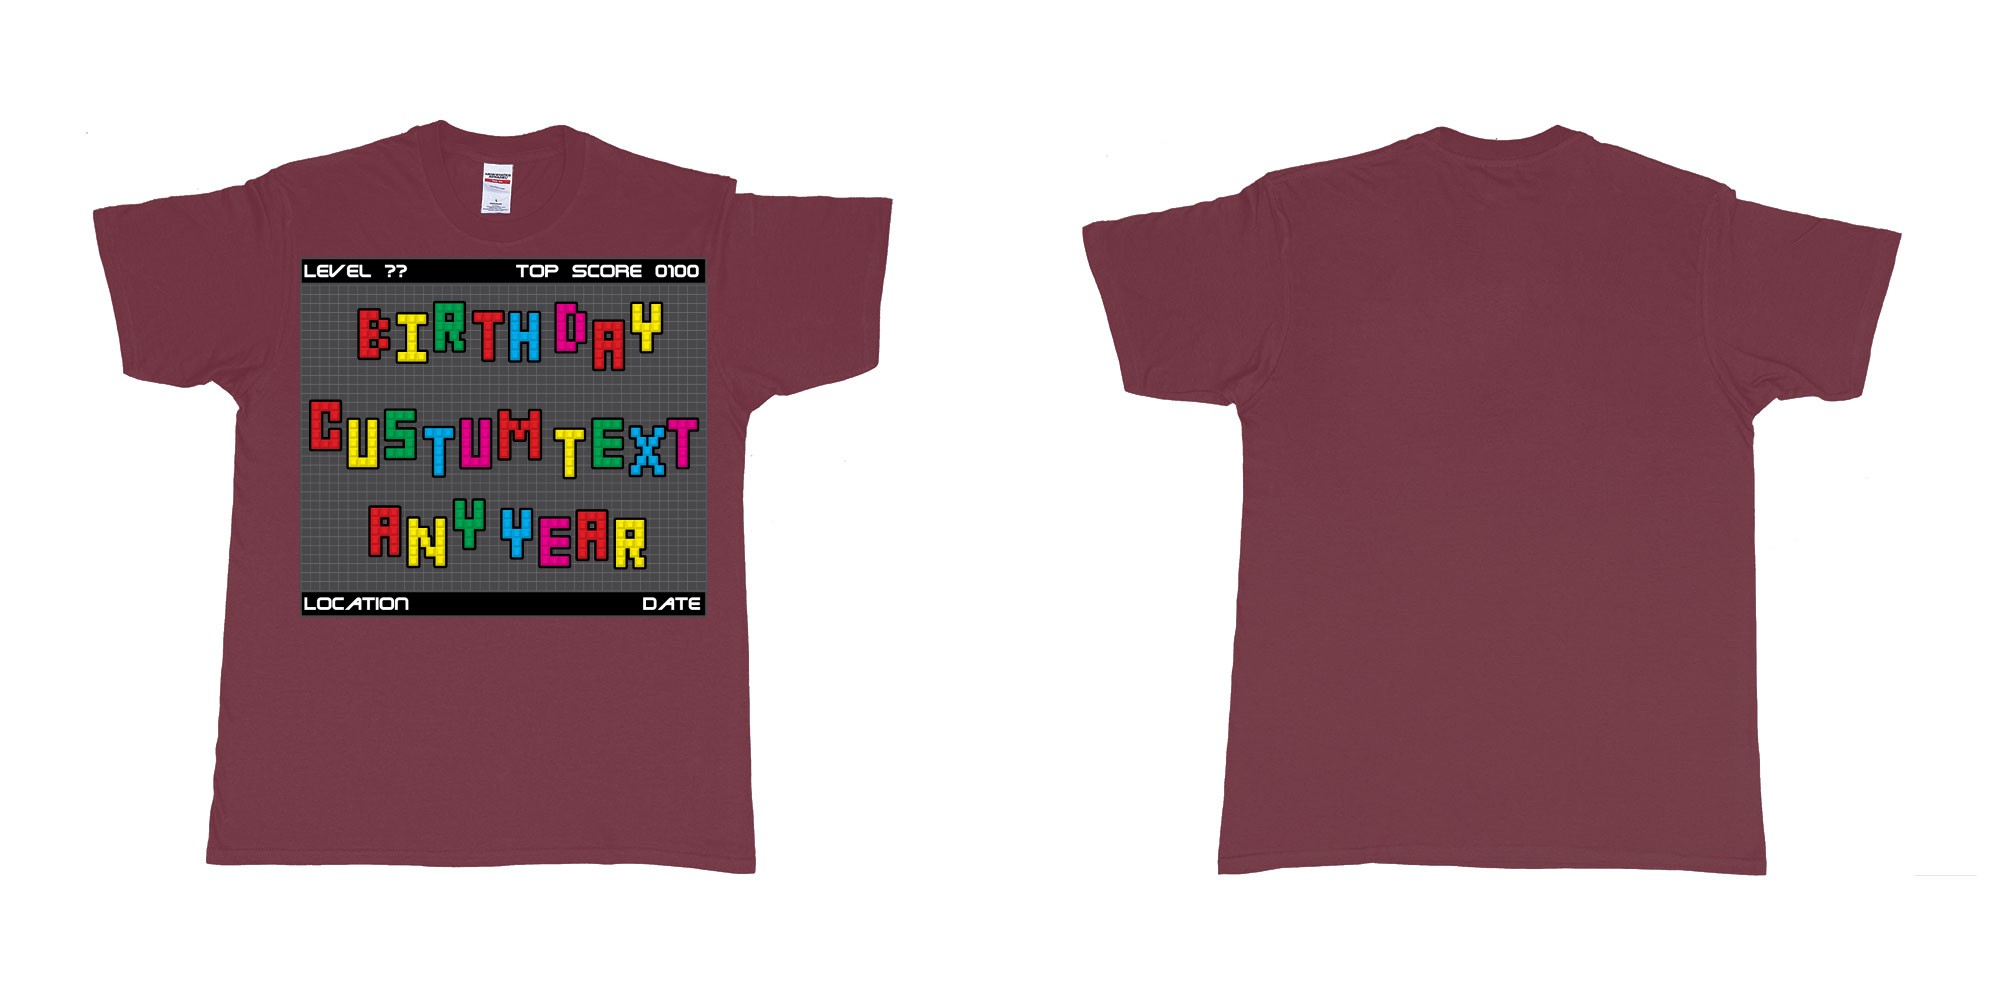 Custom tshirt design tetris block custom text birthday in fabric color marron choice your own text made in Bali by The Pirate Way